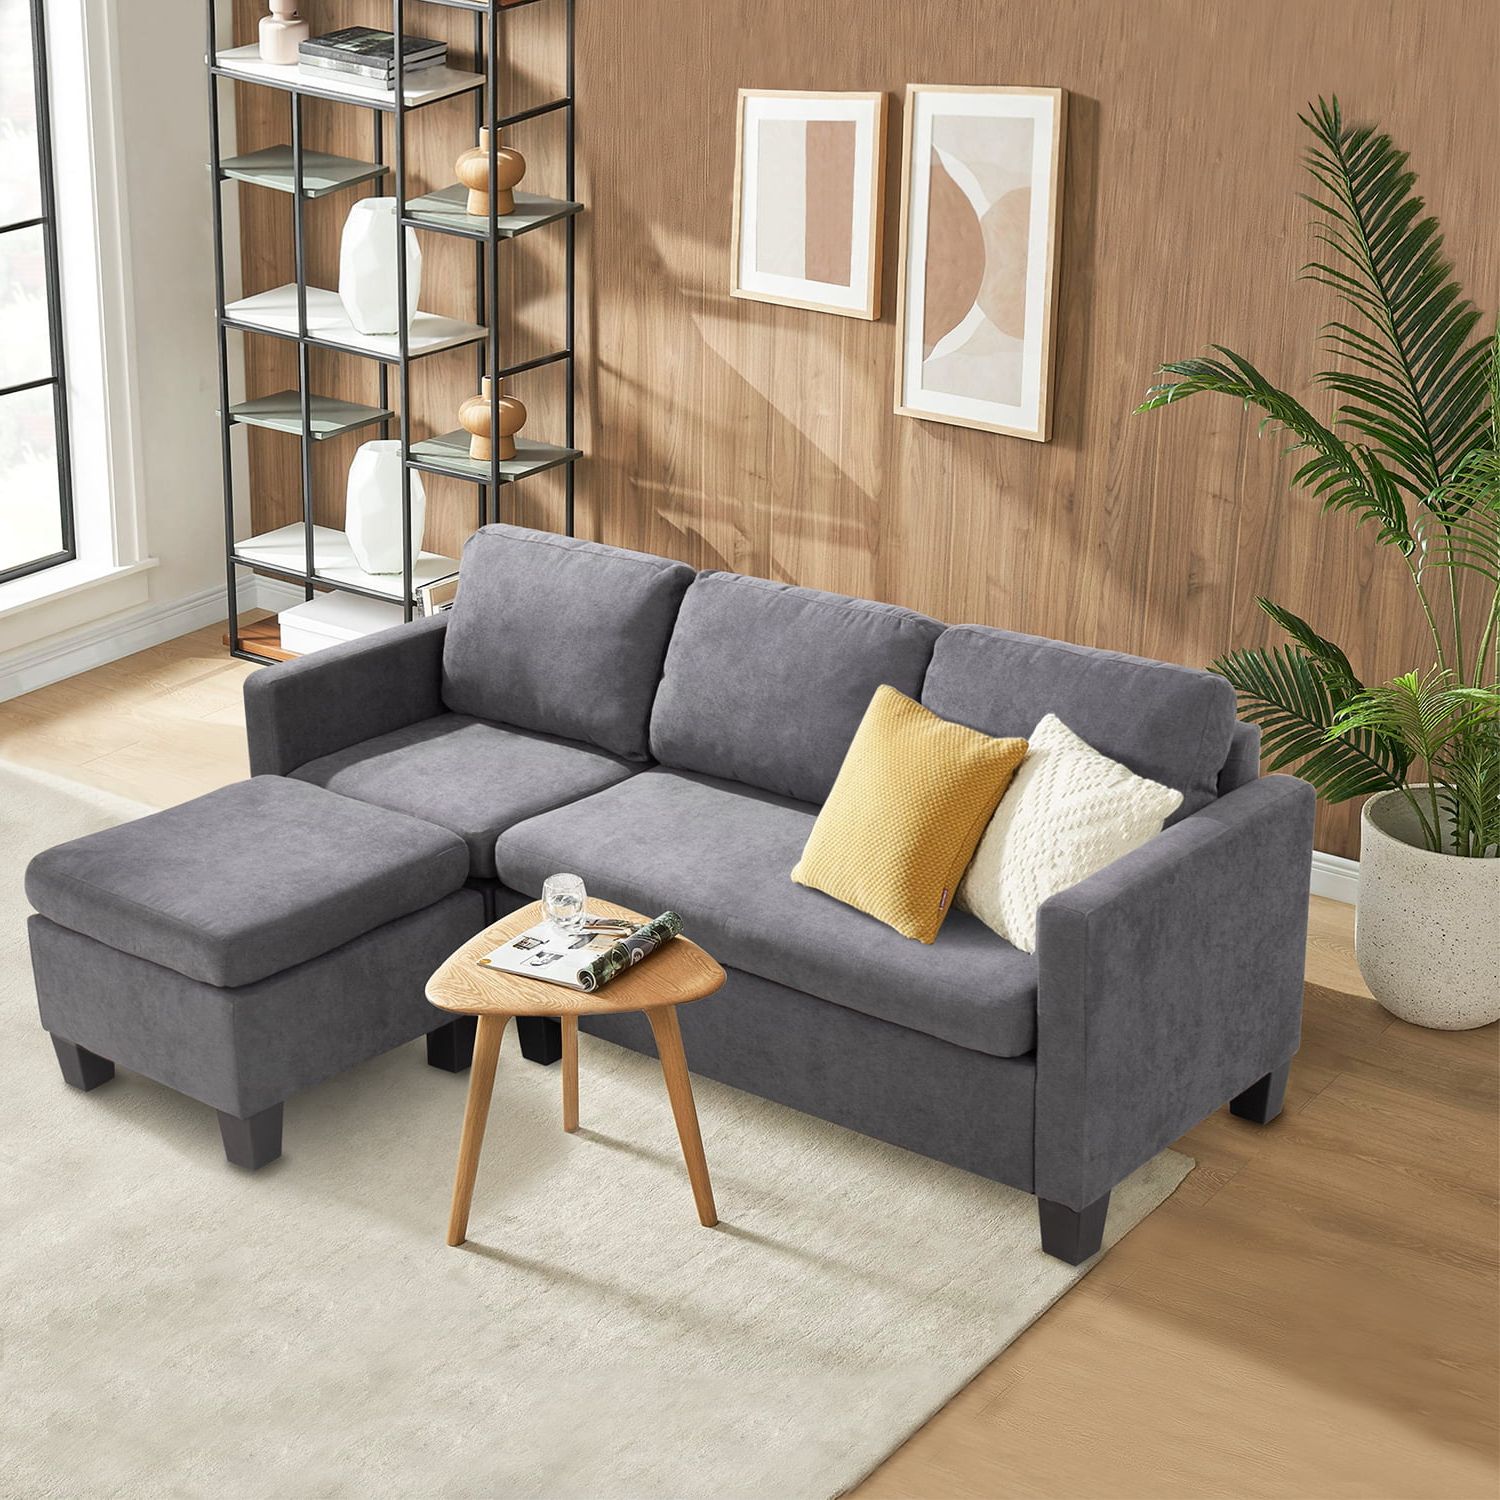 Lacoo Modern Linen Fabric L Shaped Sectional Sofa, Beige – Walmart With Modern Linen Fabric L Shaped Couches (View 7 of 20)